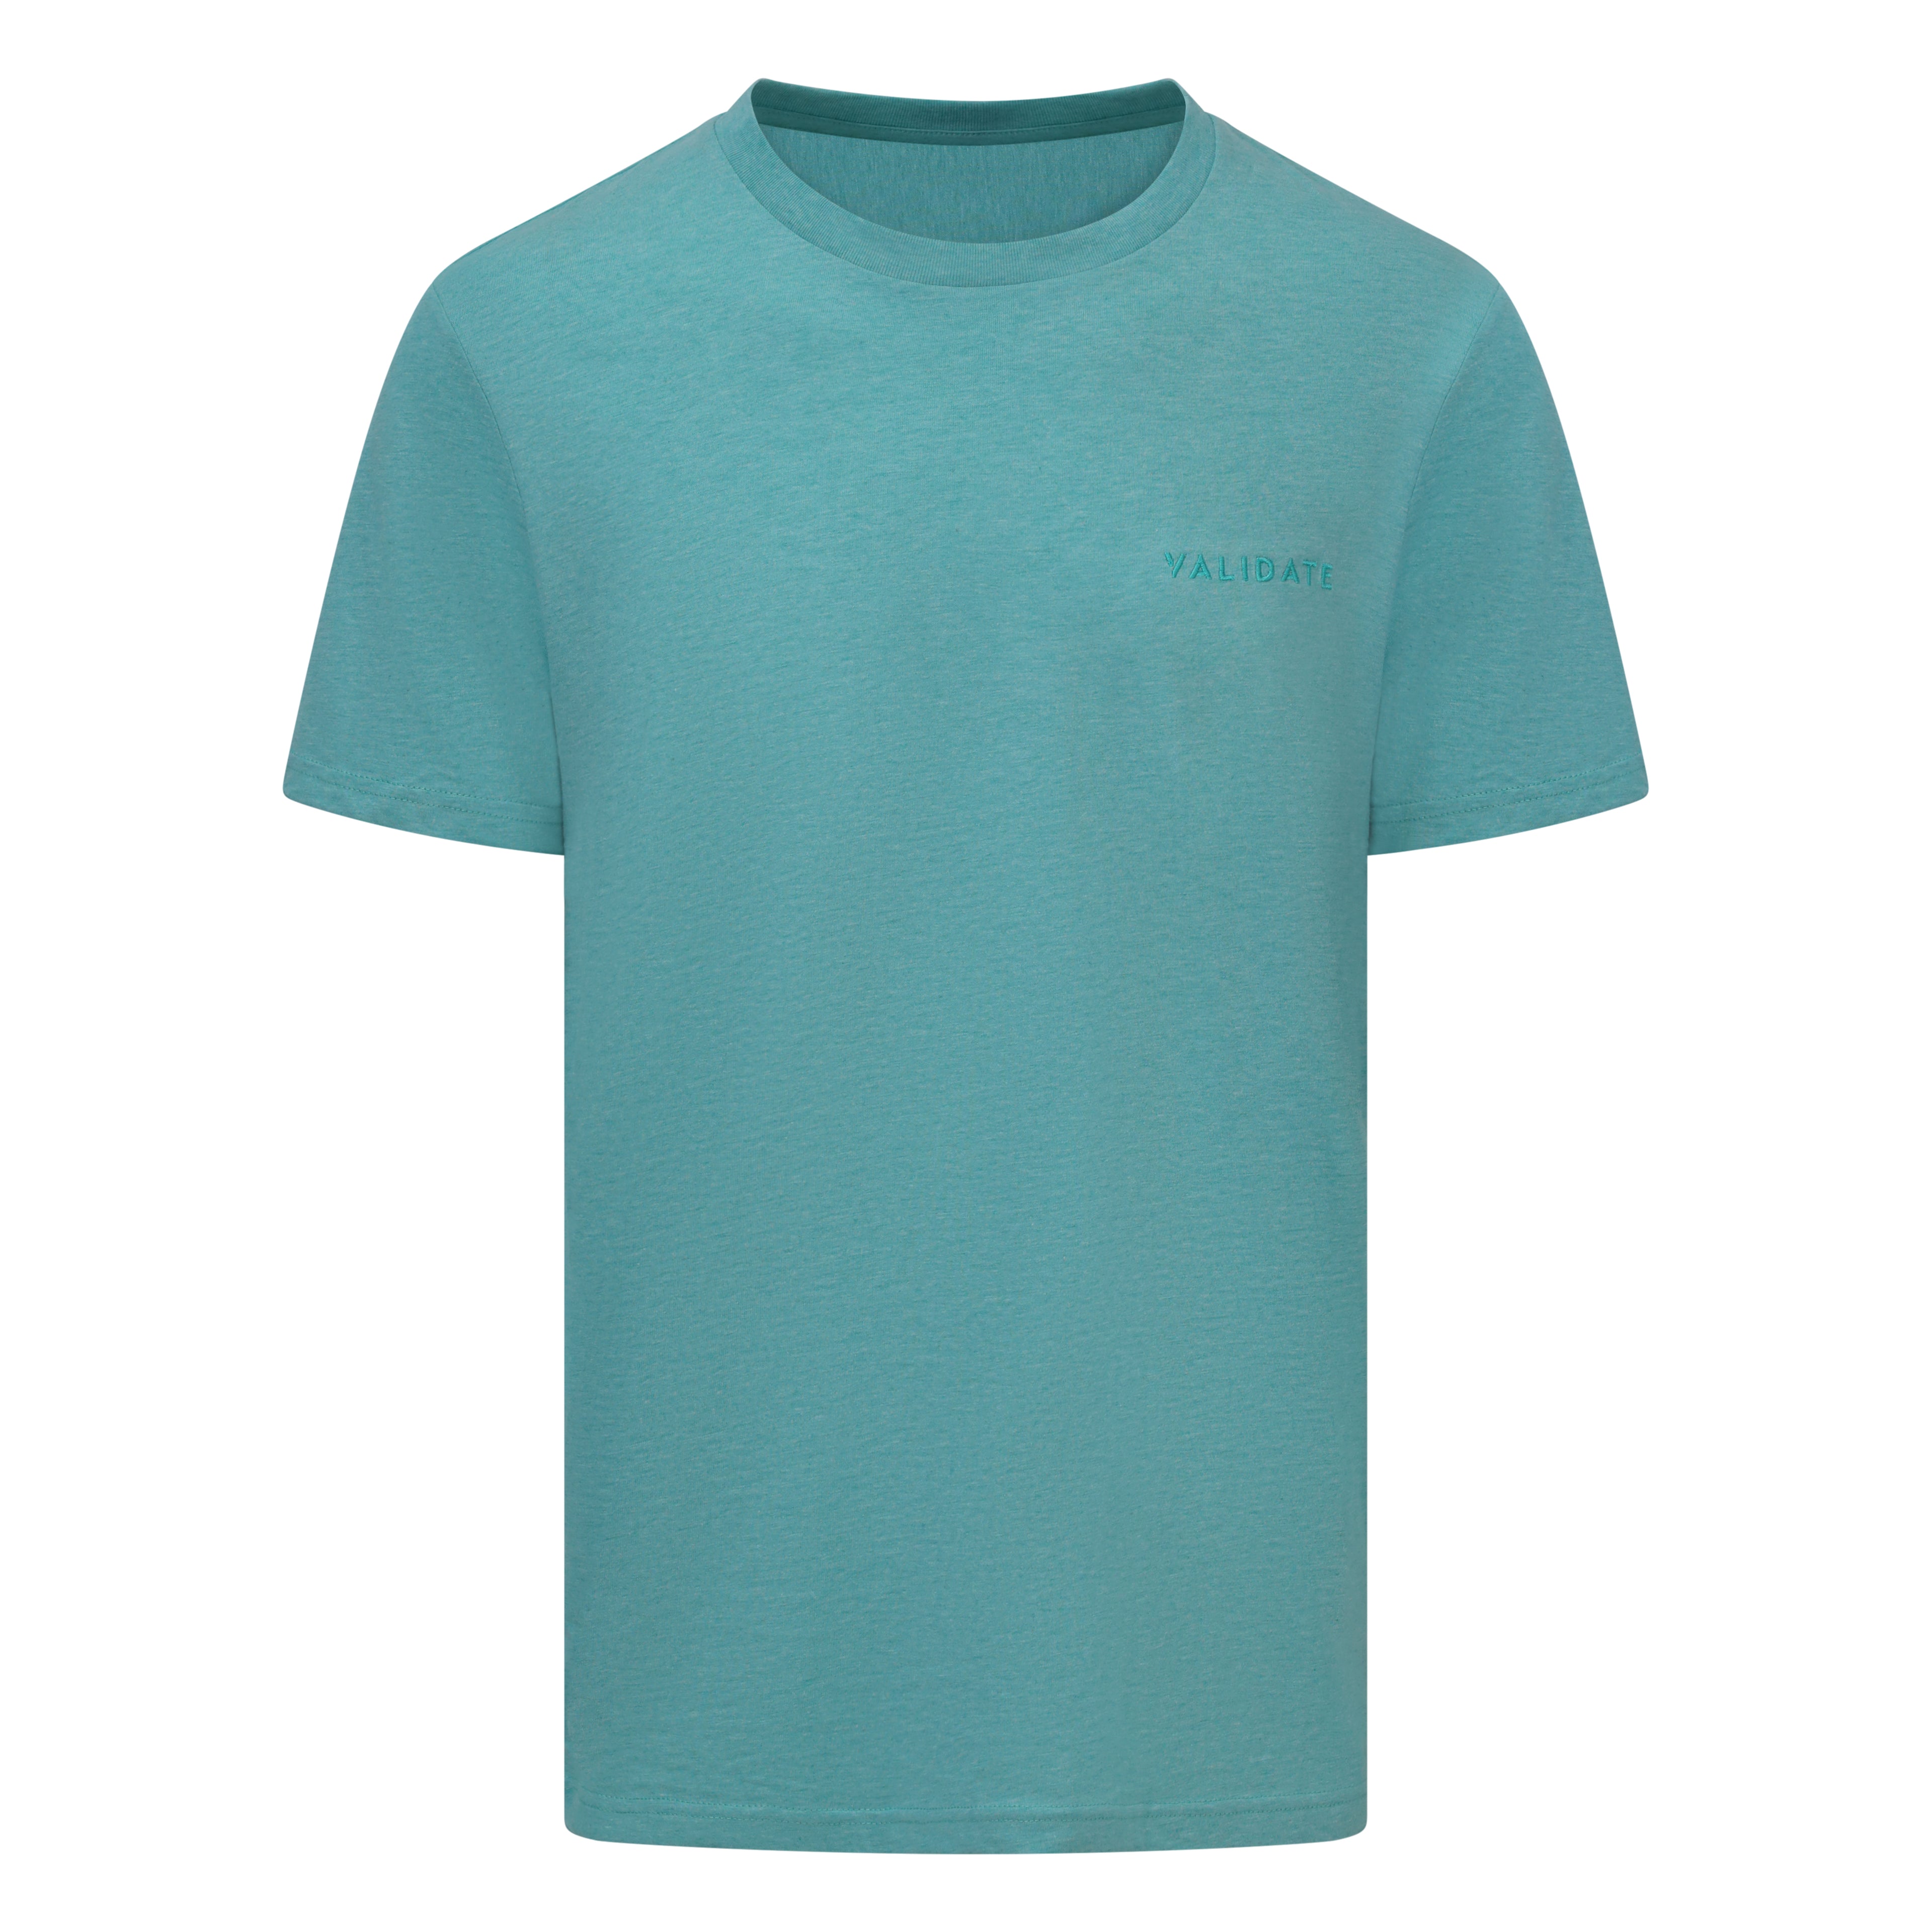 Validate Essential Core Men's T-Shirt Mid Heather Green